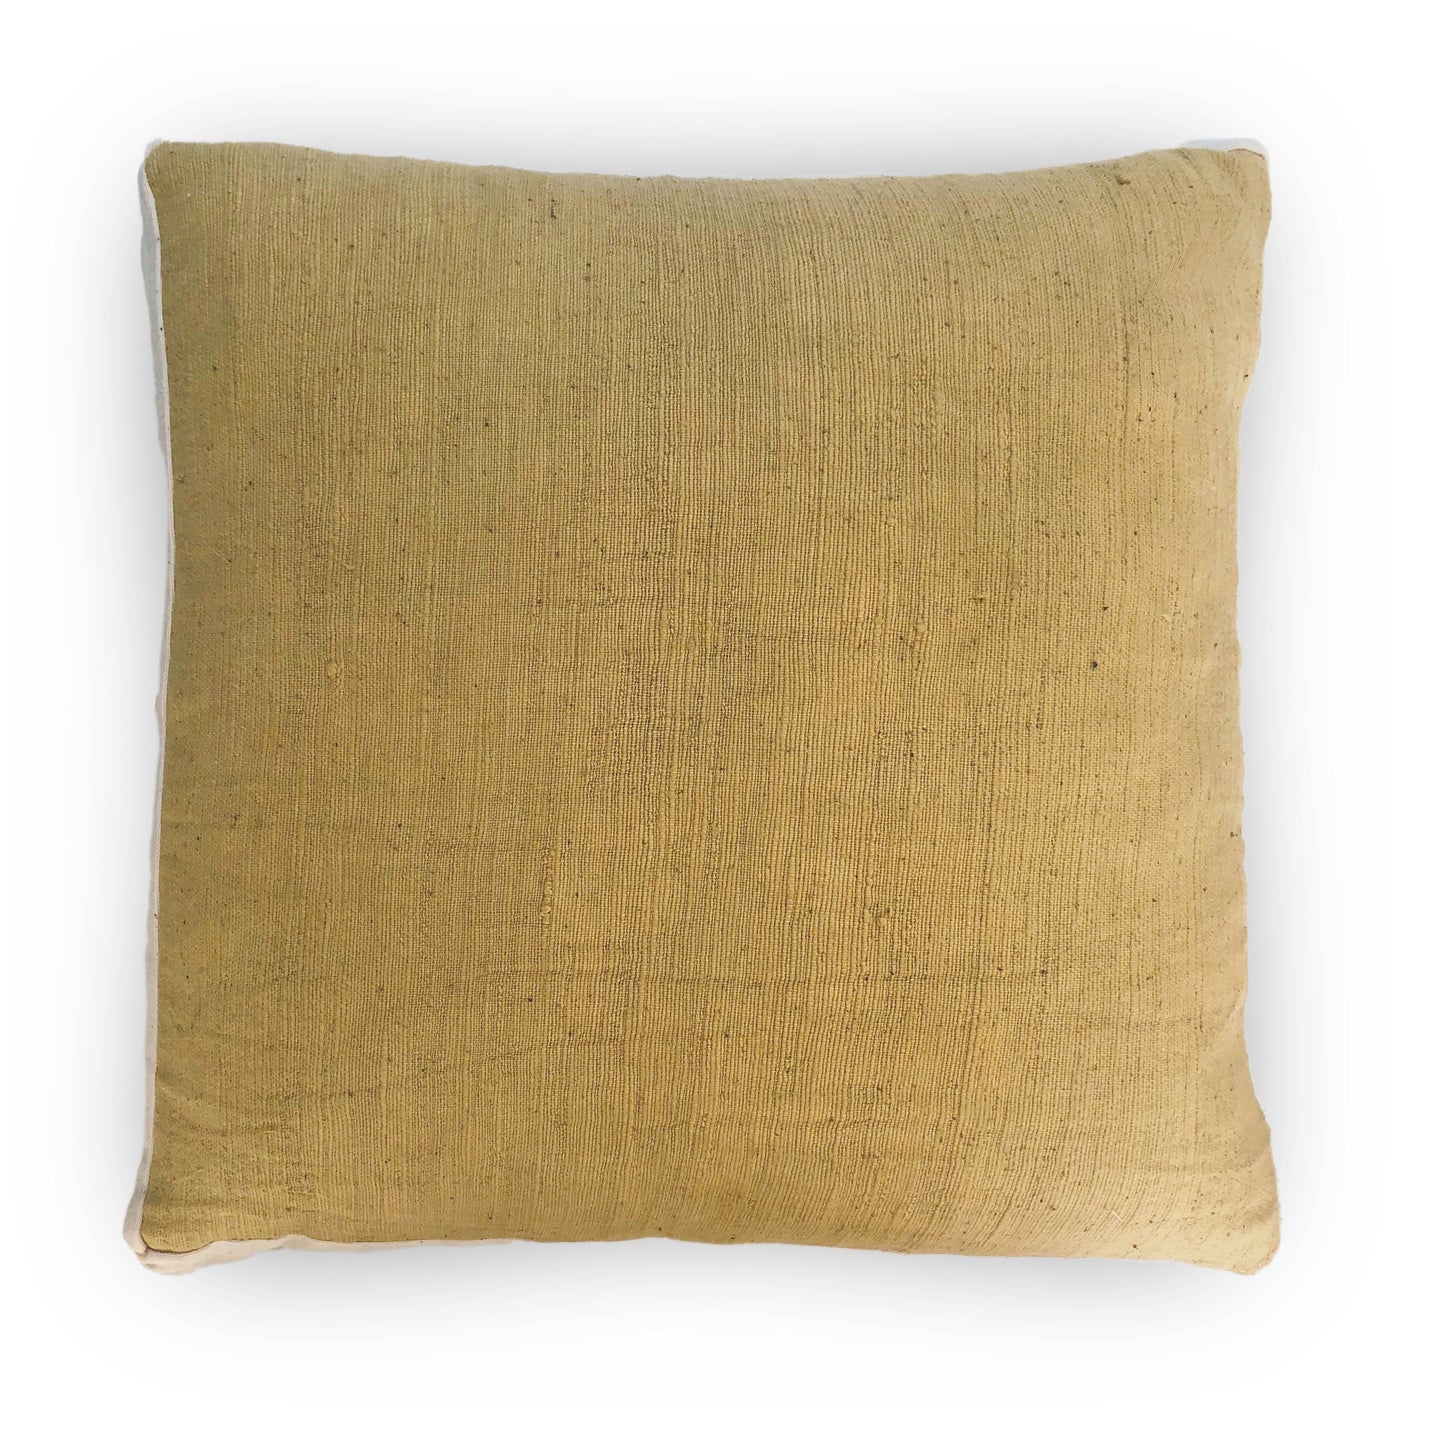 Mustard & White Contour Line Pillow Cover 18x18in